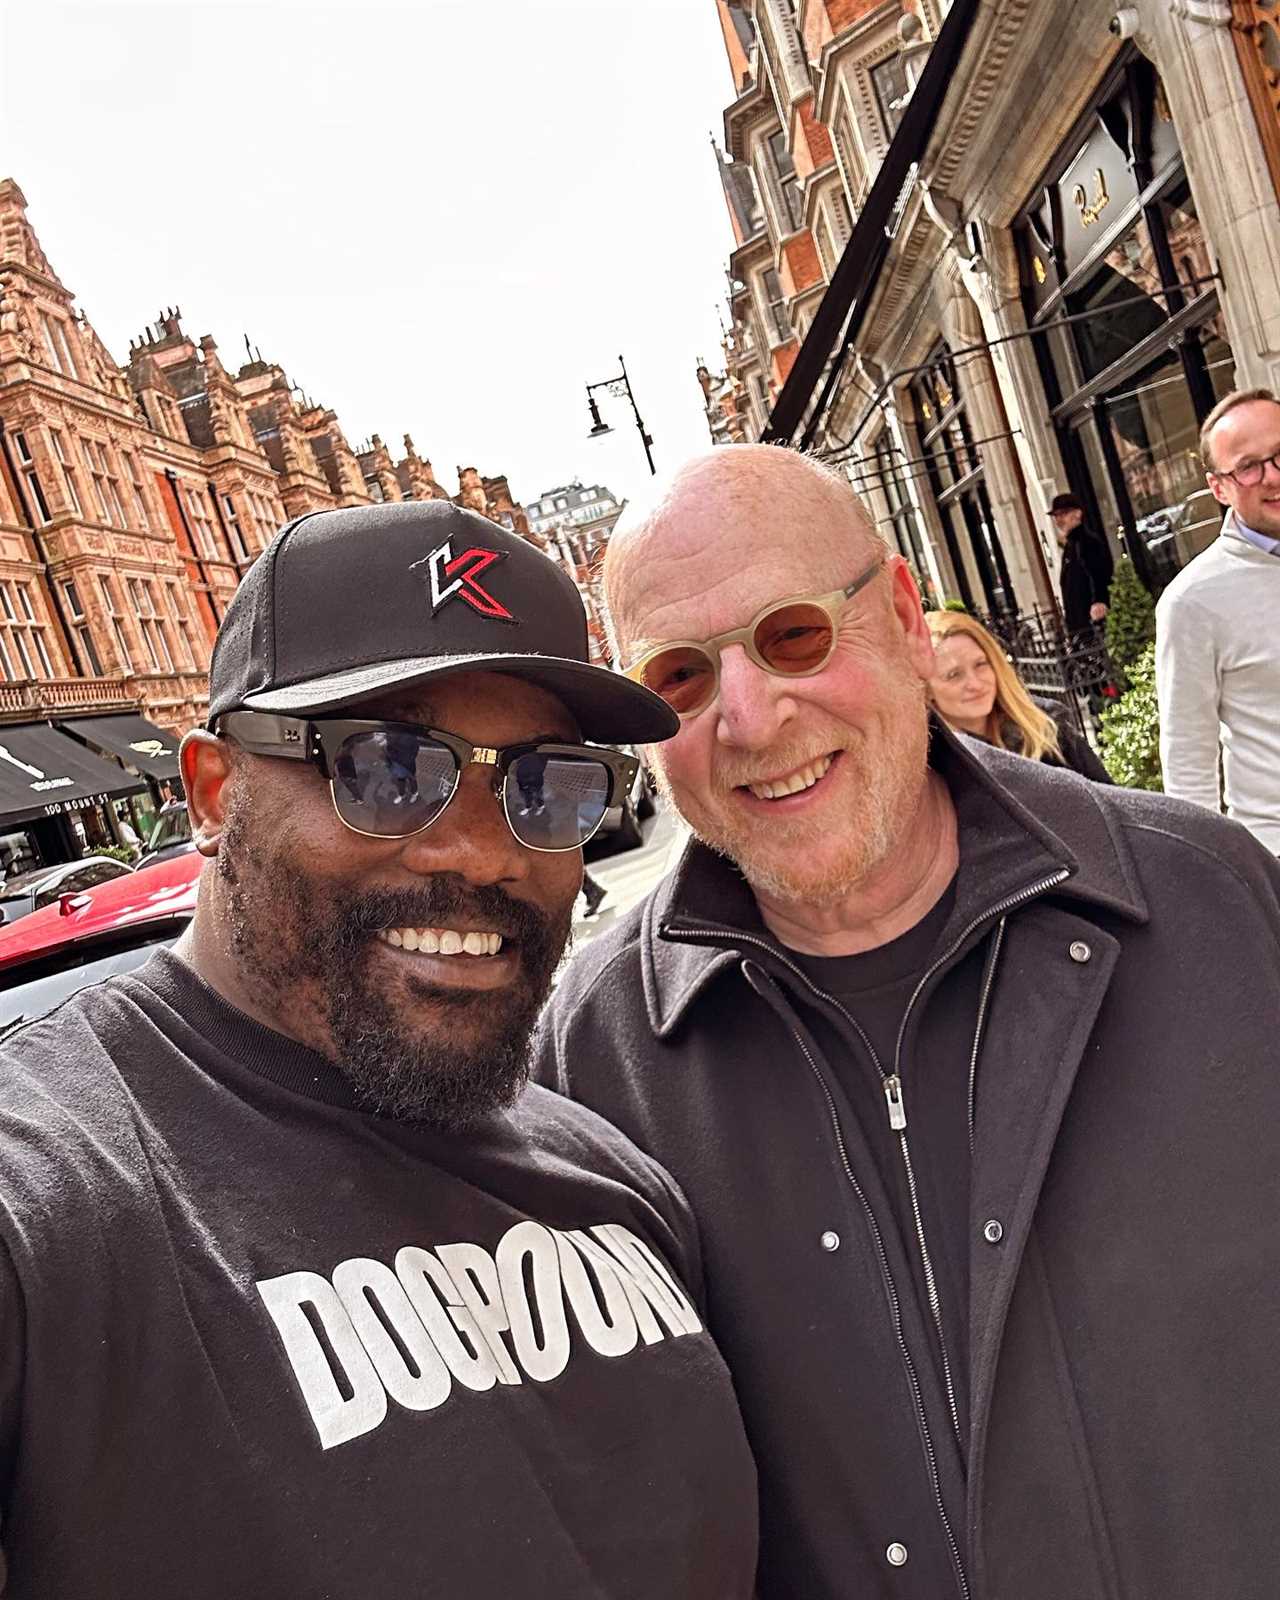 Manchester United fans criticize Derek Chisora's Posing With Controversial Figure